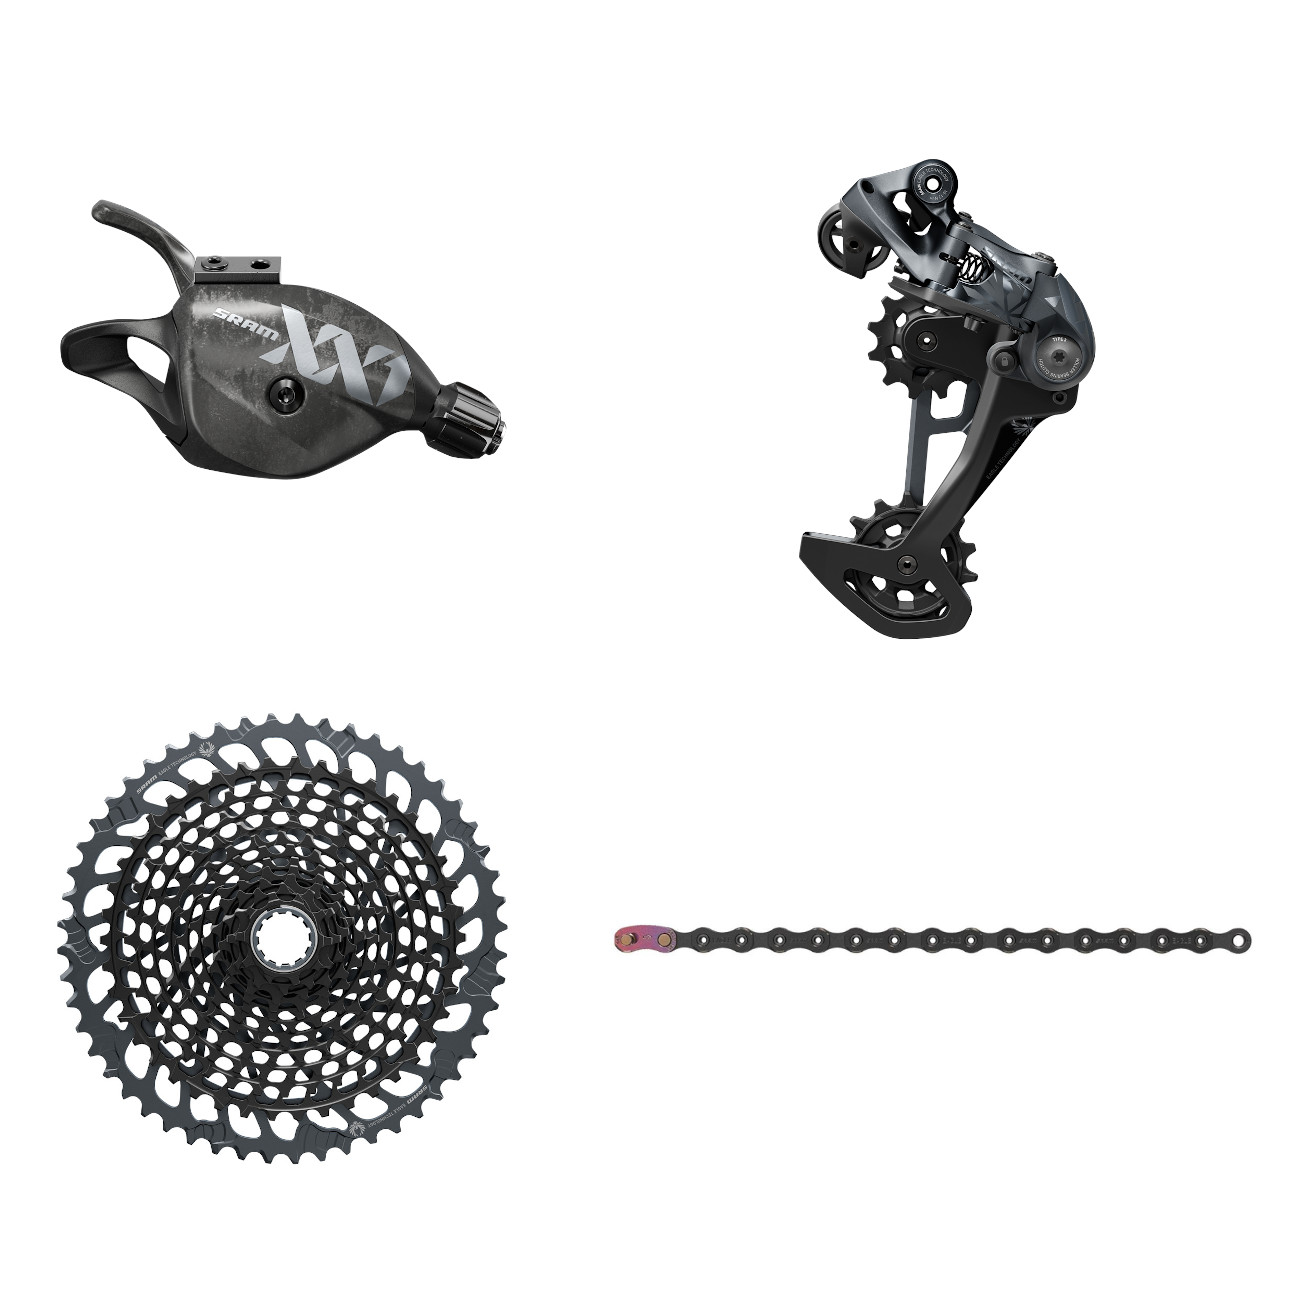 Picture of SRAM XX1 Eagle 1x12-speed Upgrade Kit - Trigger Shifter - 10-52 t. XG-1295 Cassette - black